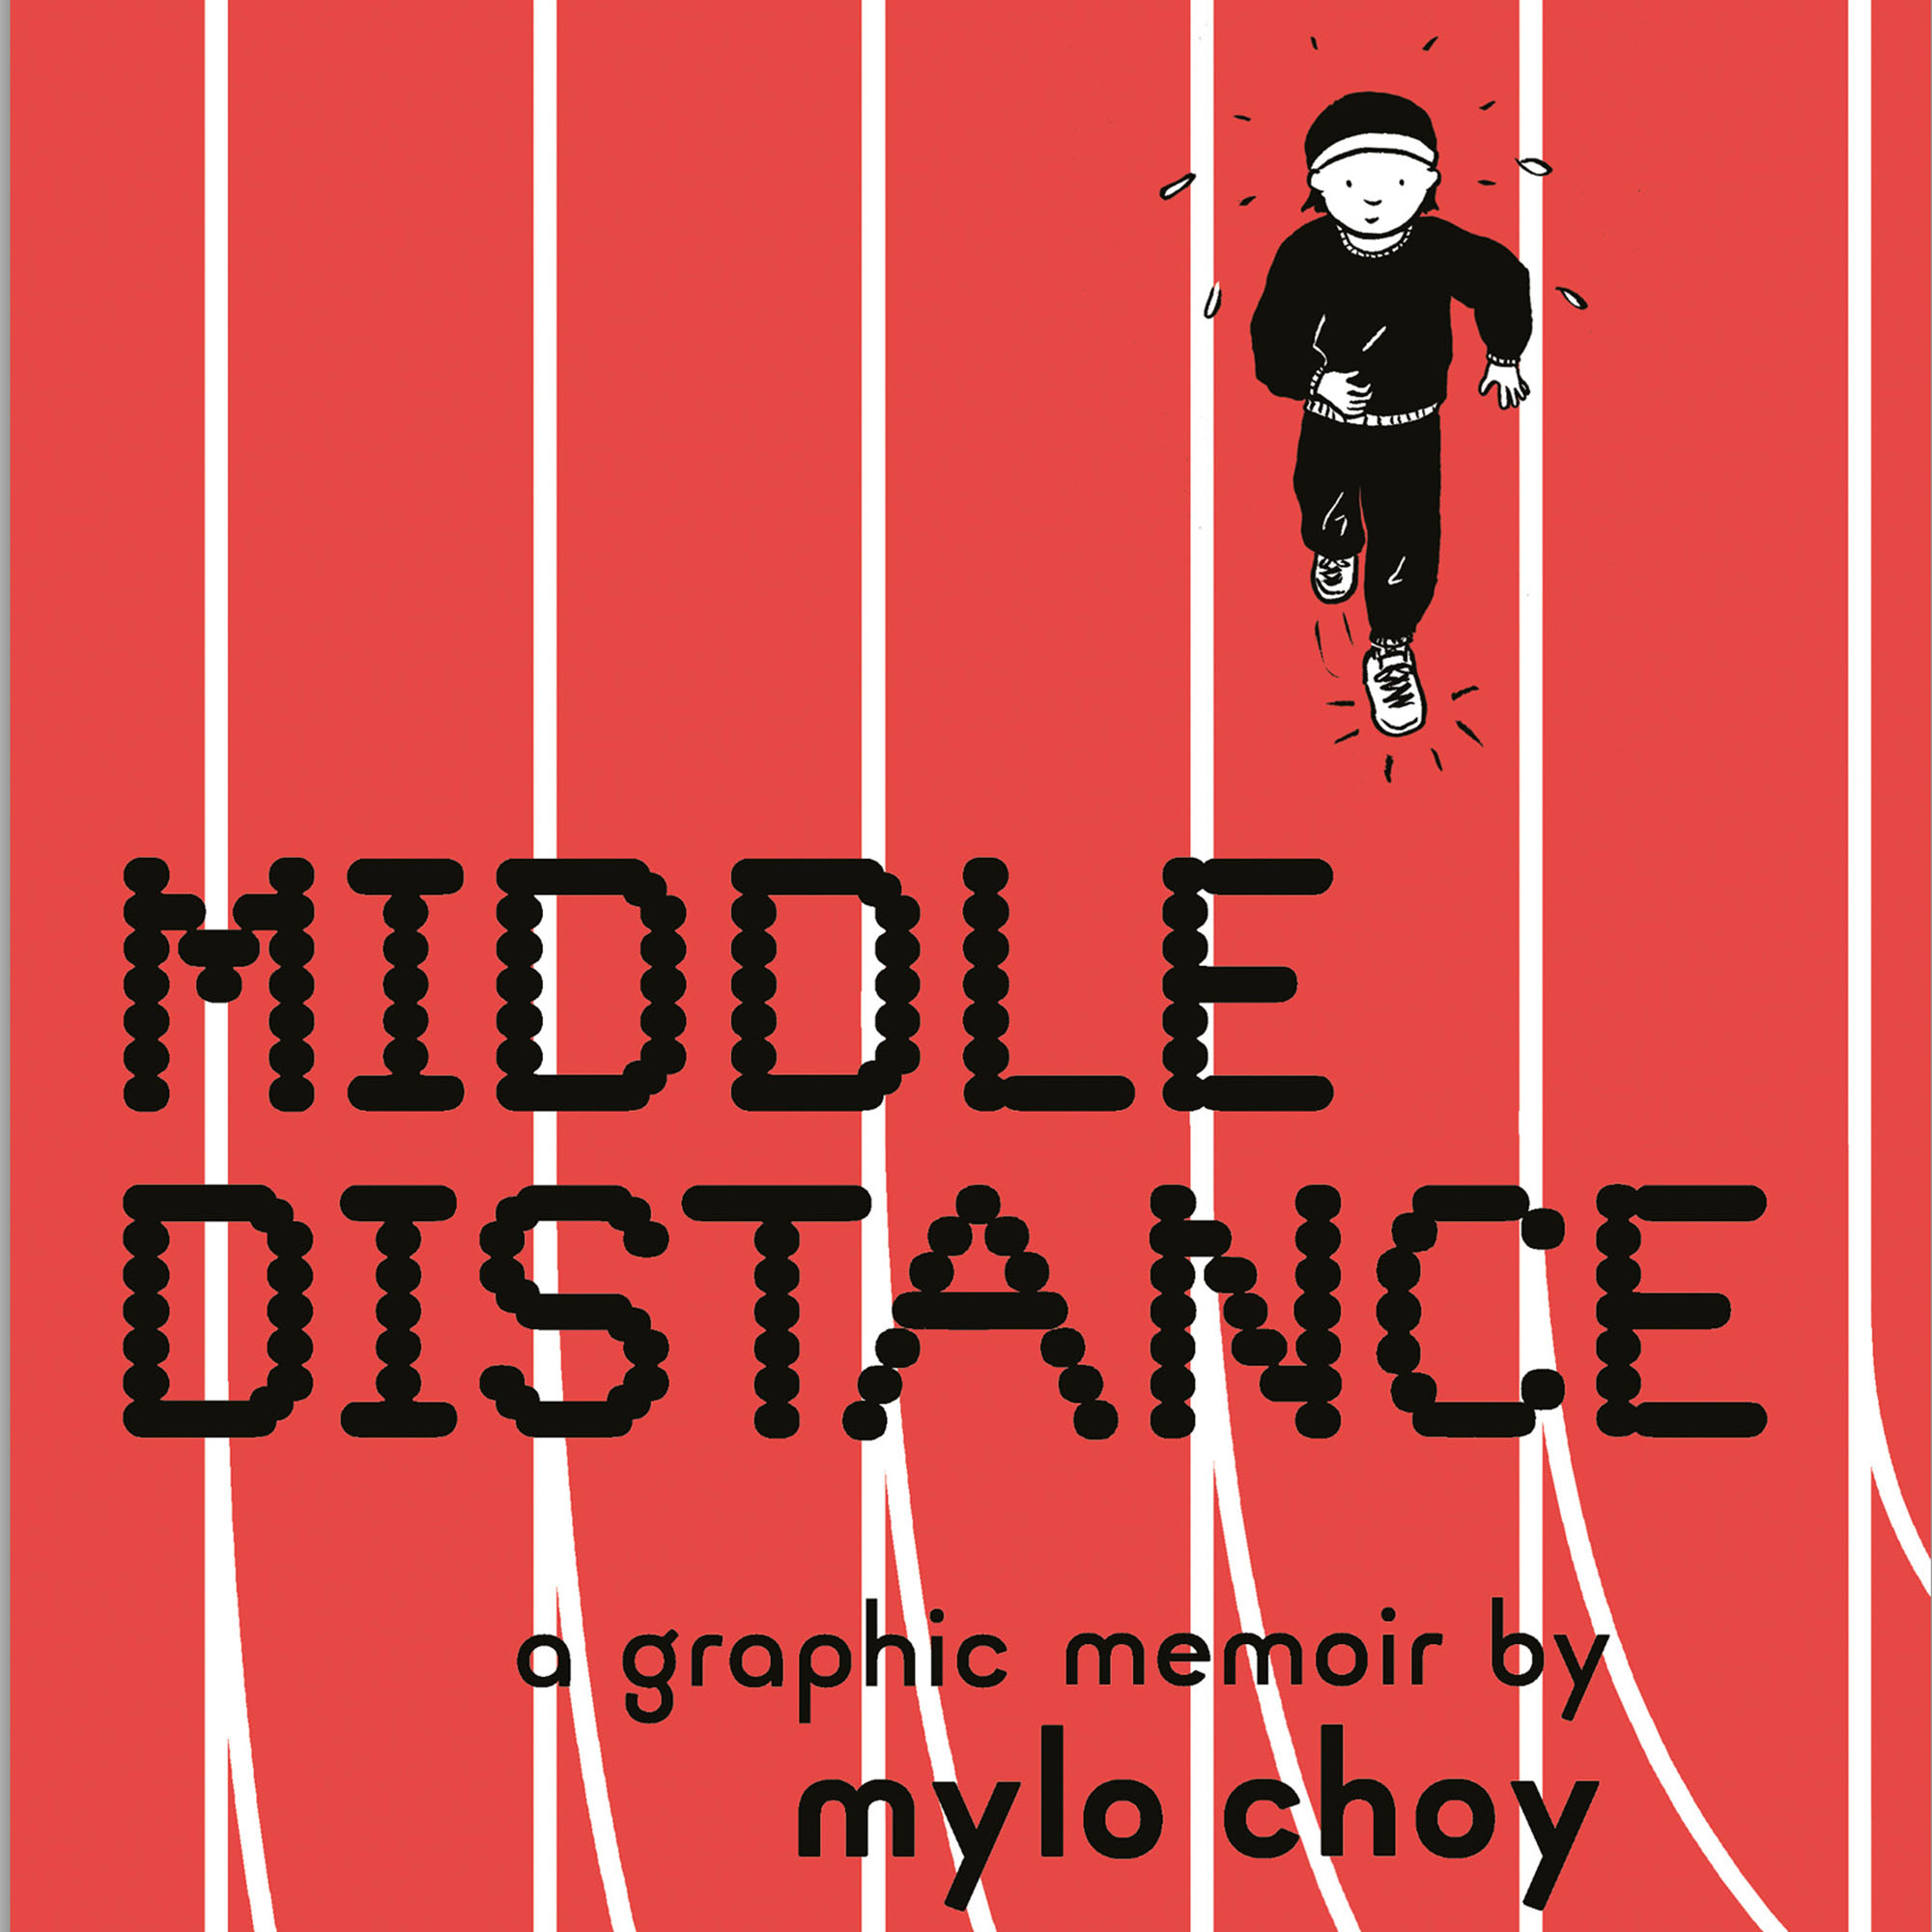 Photo: The cover of the book "Middle Distance" by Mylo Choy. The background is red with white lines drawn vertically across it. There is a cartoon-like illustration of a person jogging down a pair of the lines